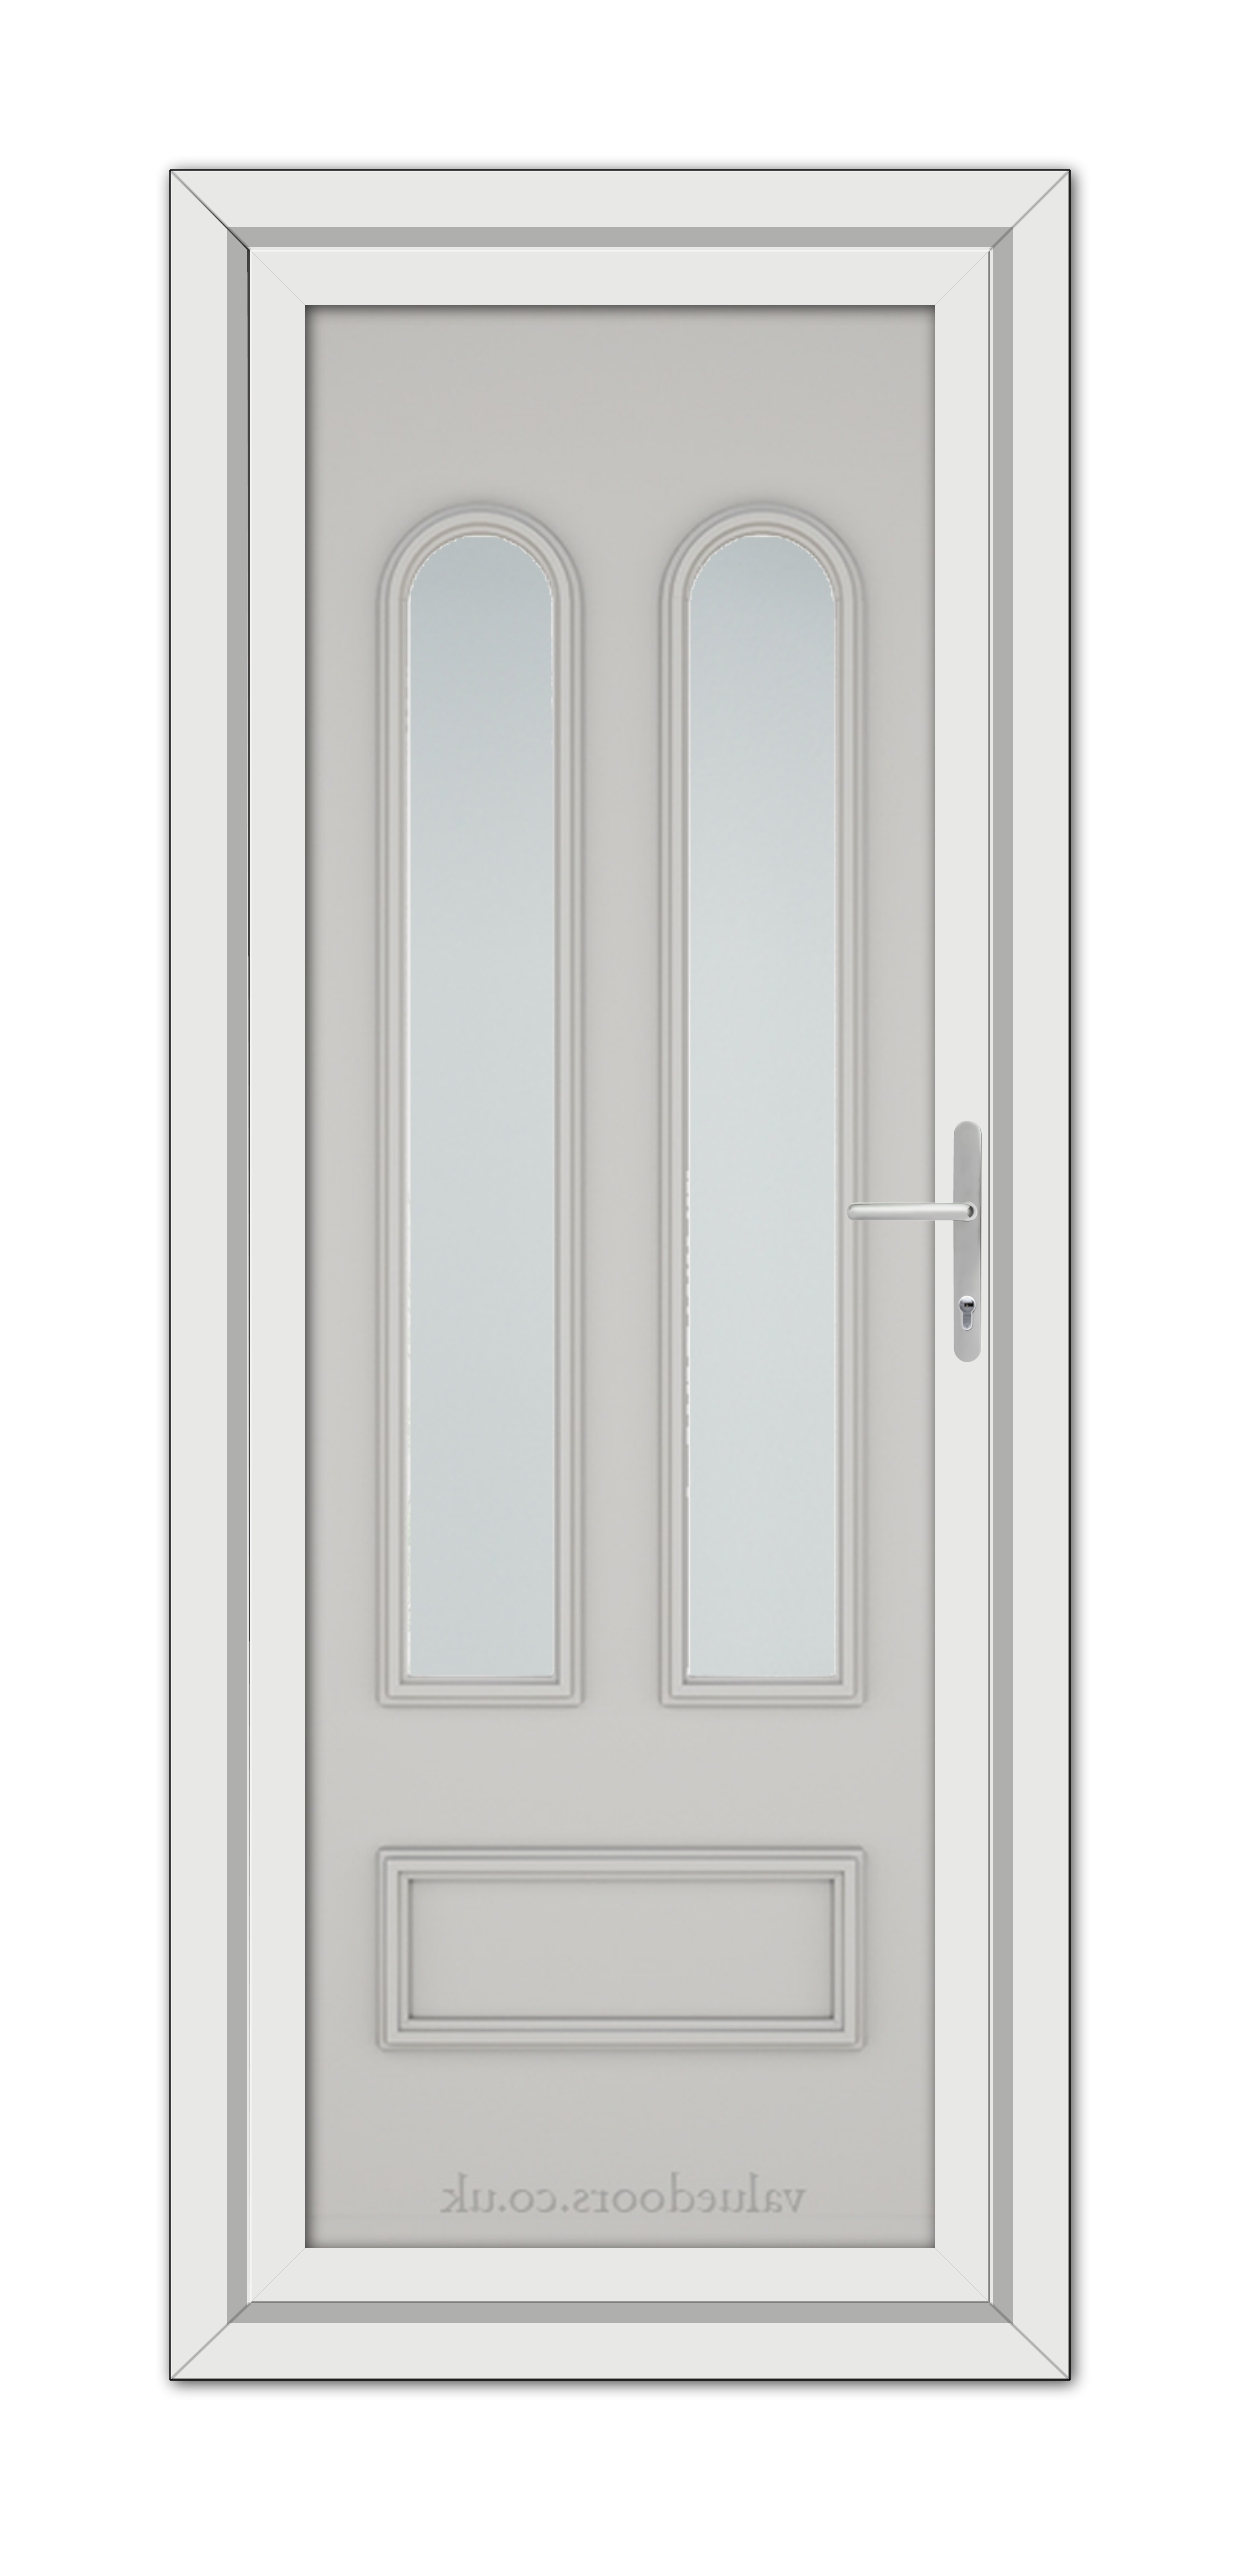 A Silver Grey Madrid uPVC door with glass panels.